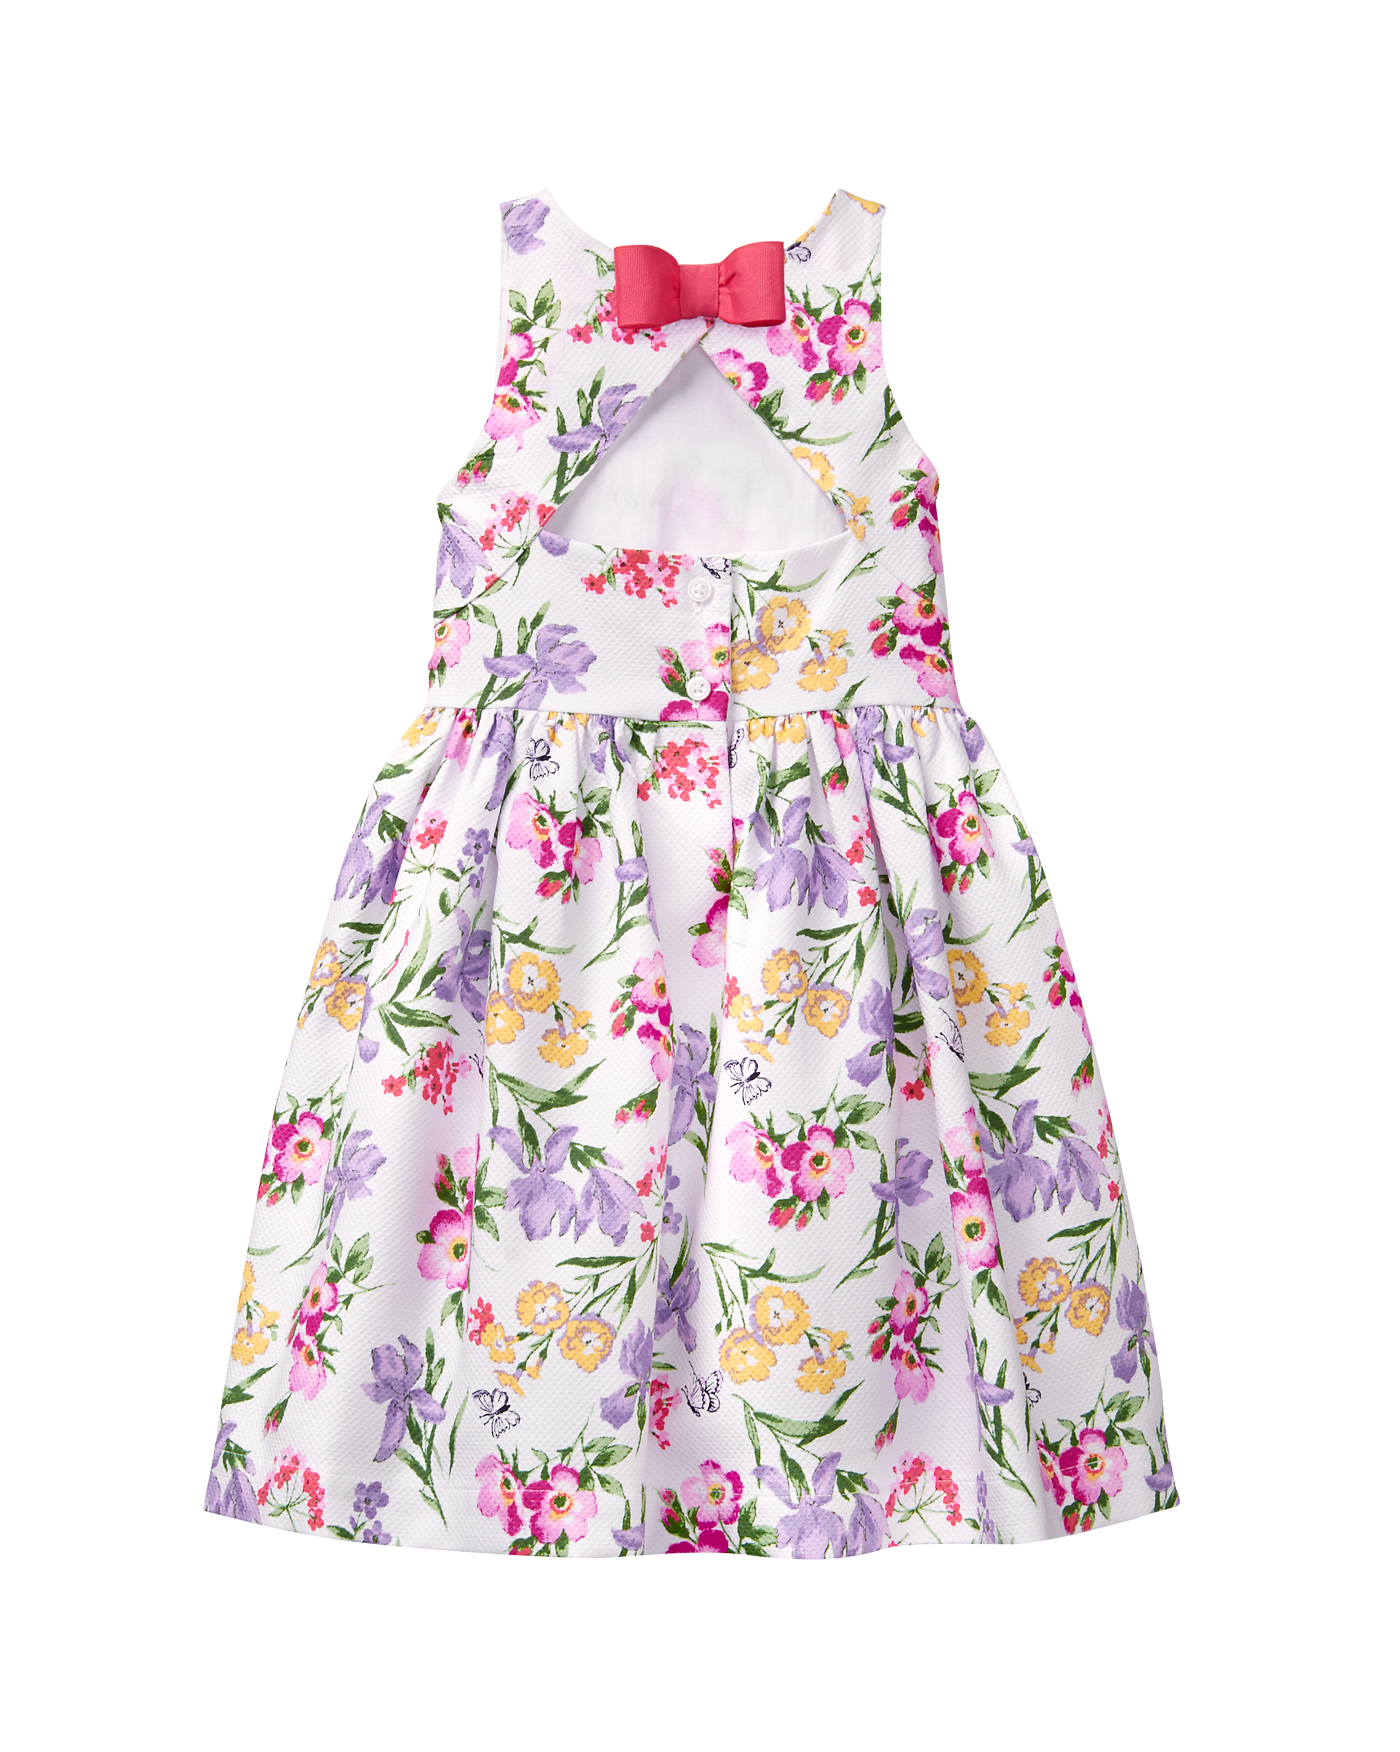 White Floral Floral Dress by Janie and Jack